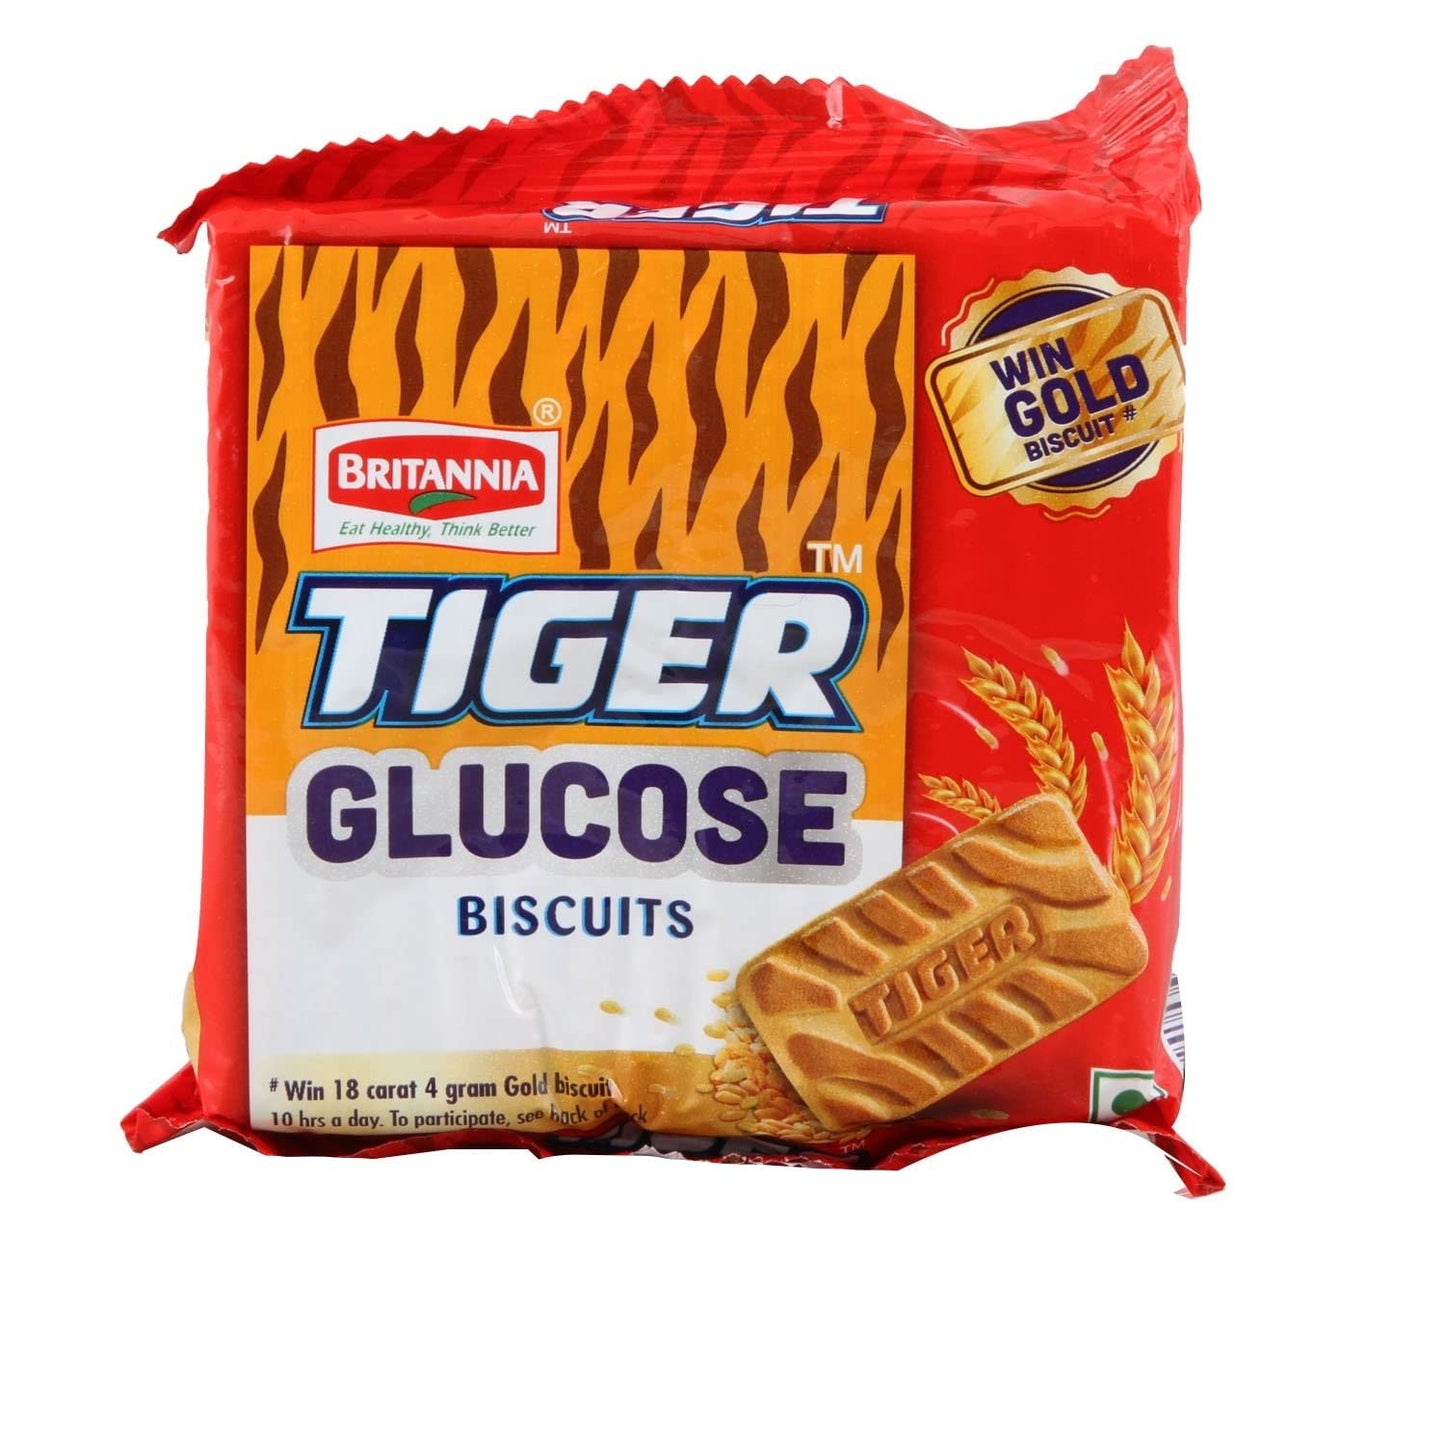 Tiger Glucose Rs.5